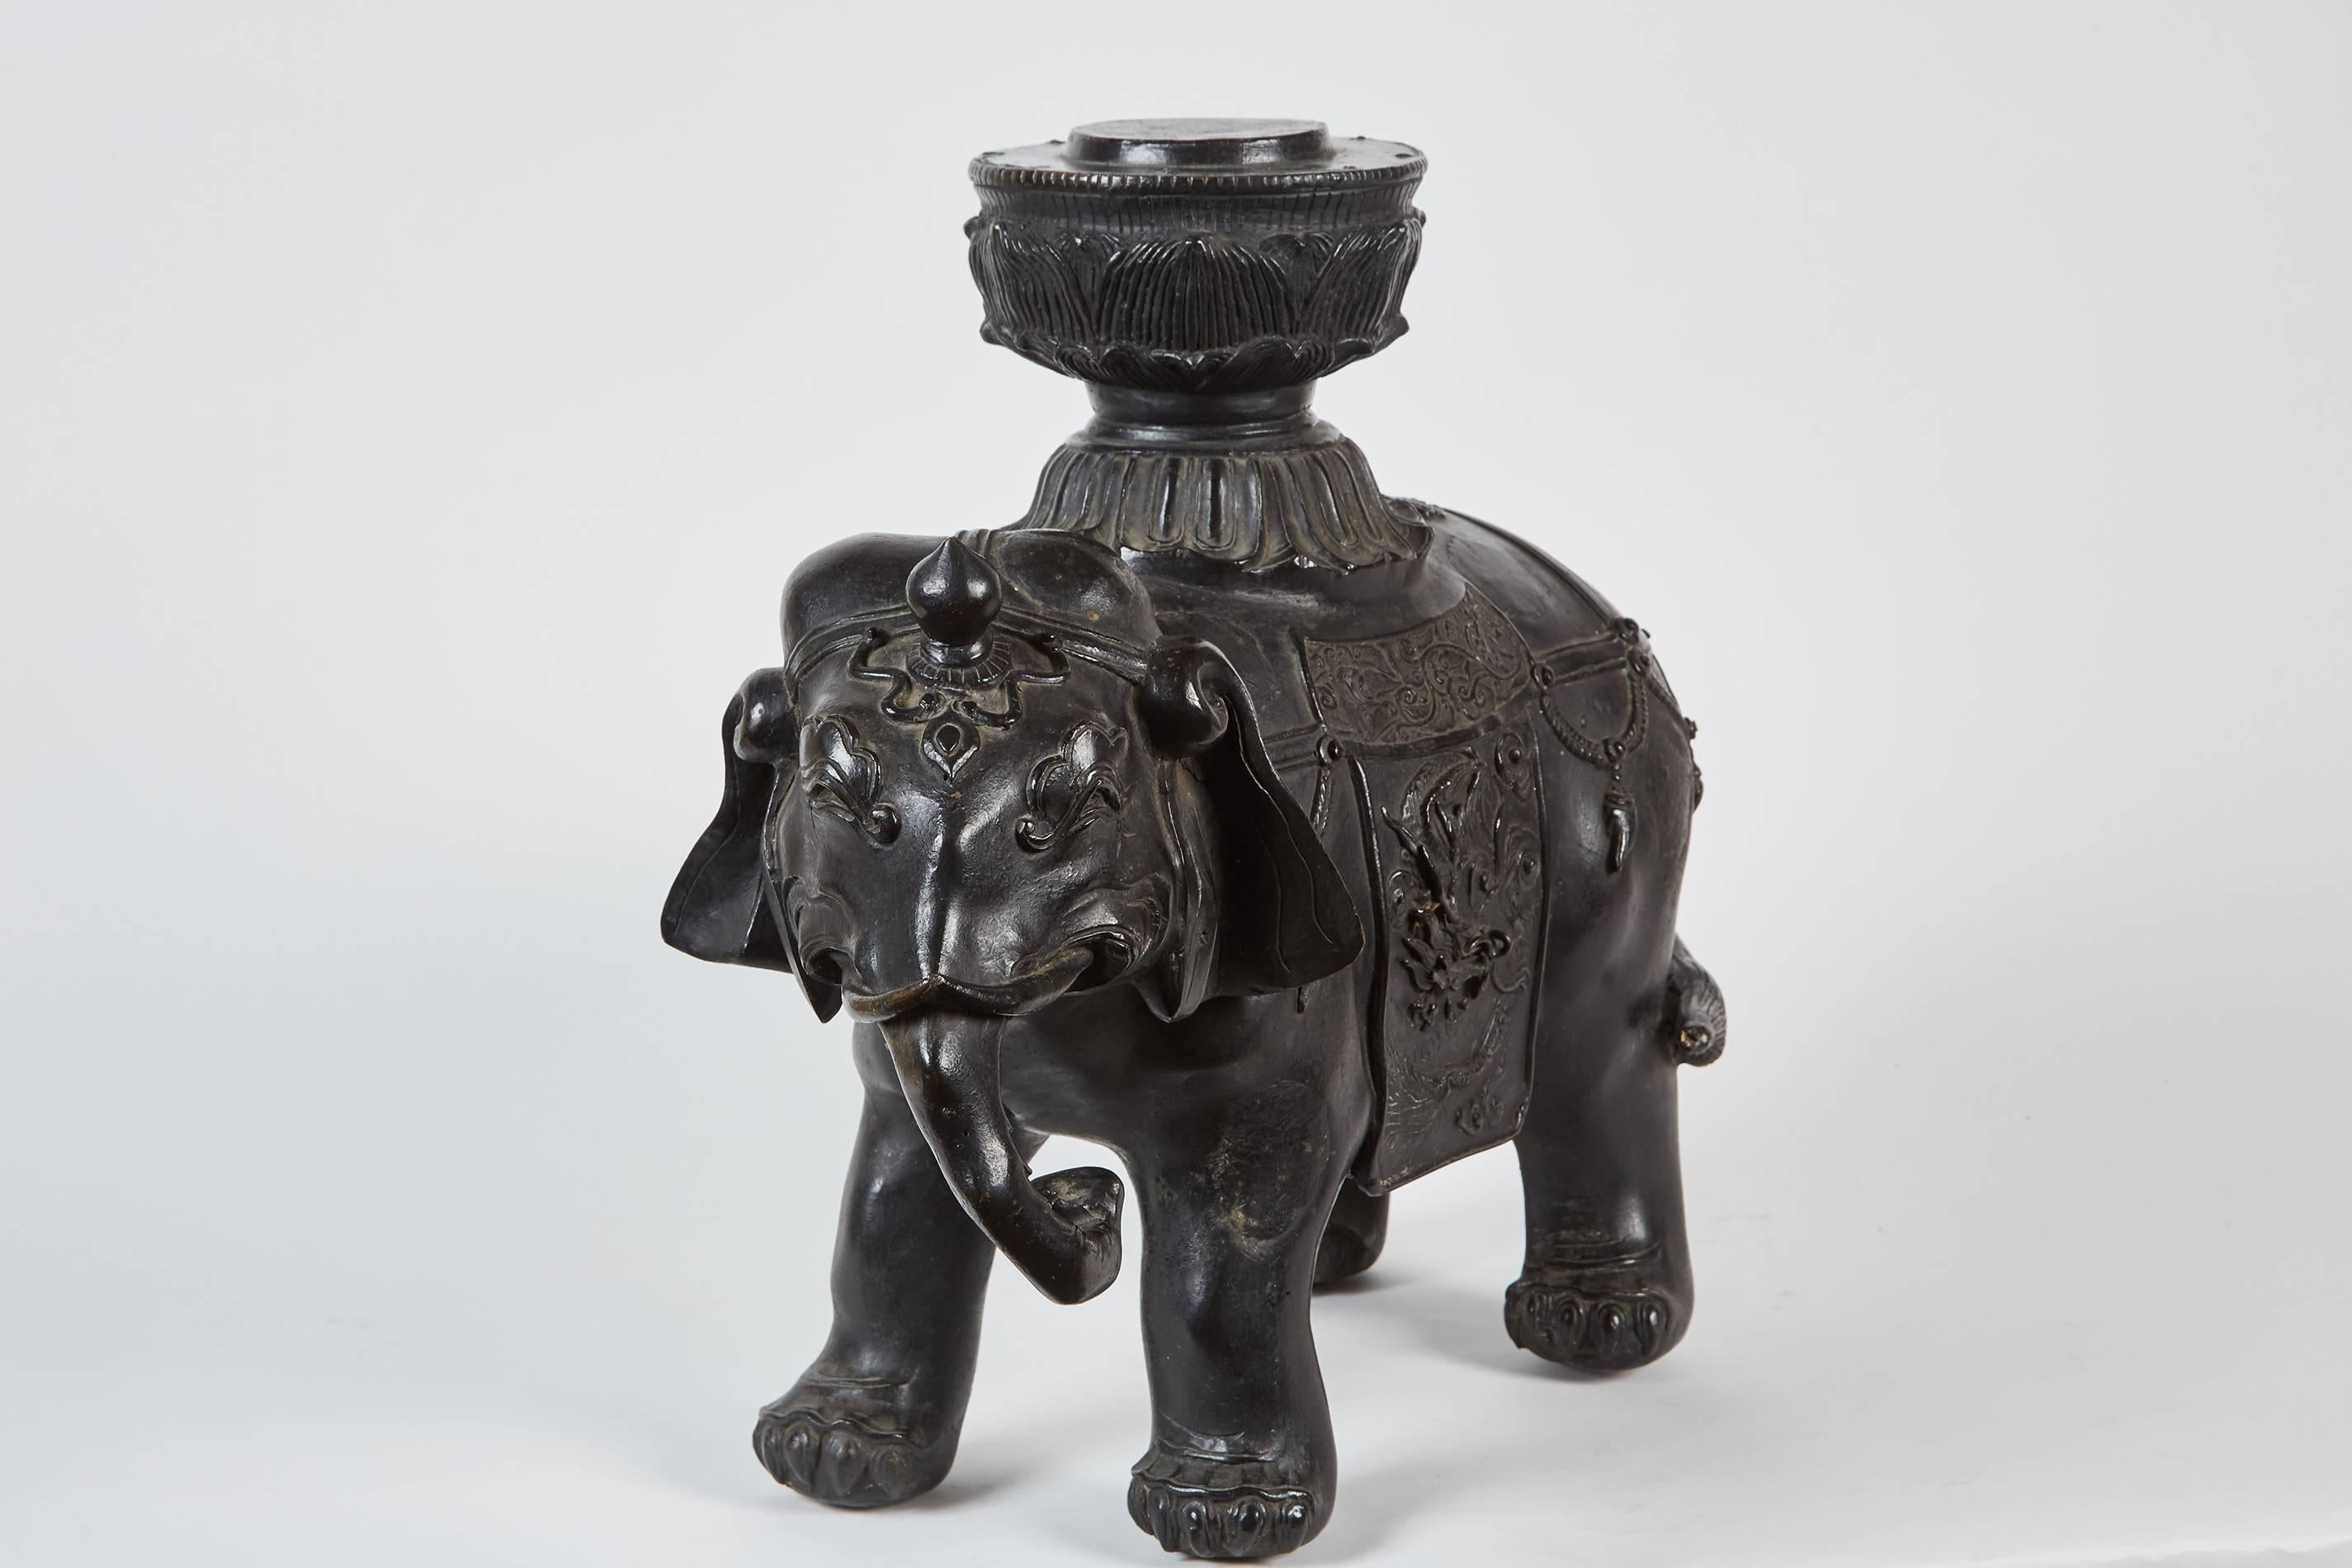 A medium sized 19th century Japanese bronze elephant that could possibly be from a temple in Kyoto, Japan. The piece features an elephant with a howdah, or a decorative cloth over the elephants body. The howdah has design elements such as a dragon,